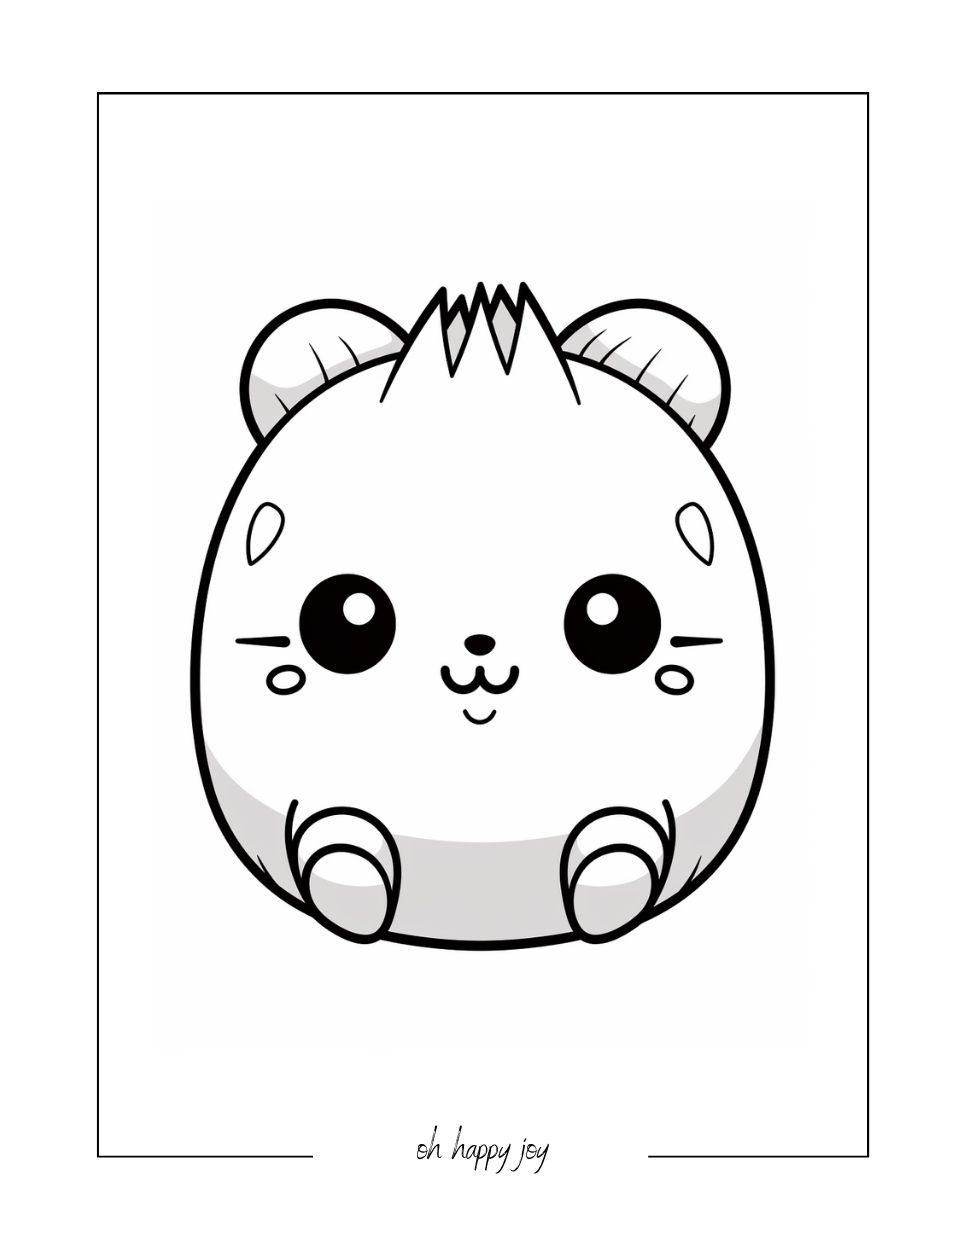 Squishmallow free coloring sheet